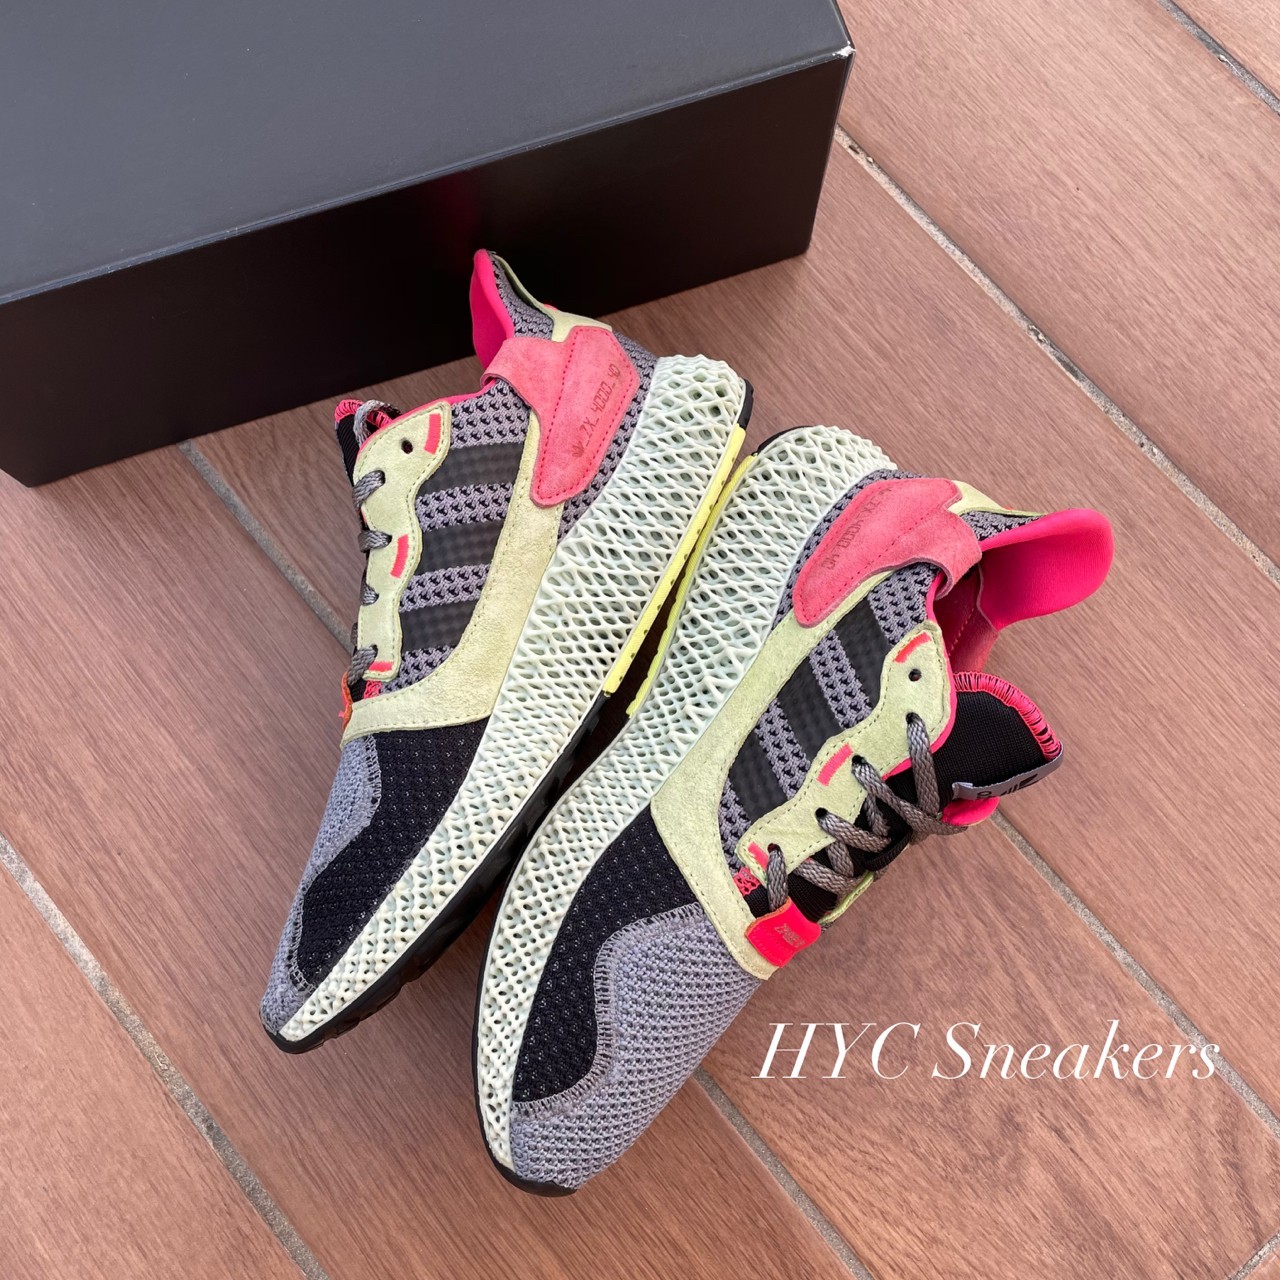 ADIDAS ZX 4000 4D 粉綠US7.5 BD7927 – HYC Sneakers Online Store